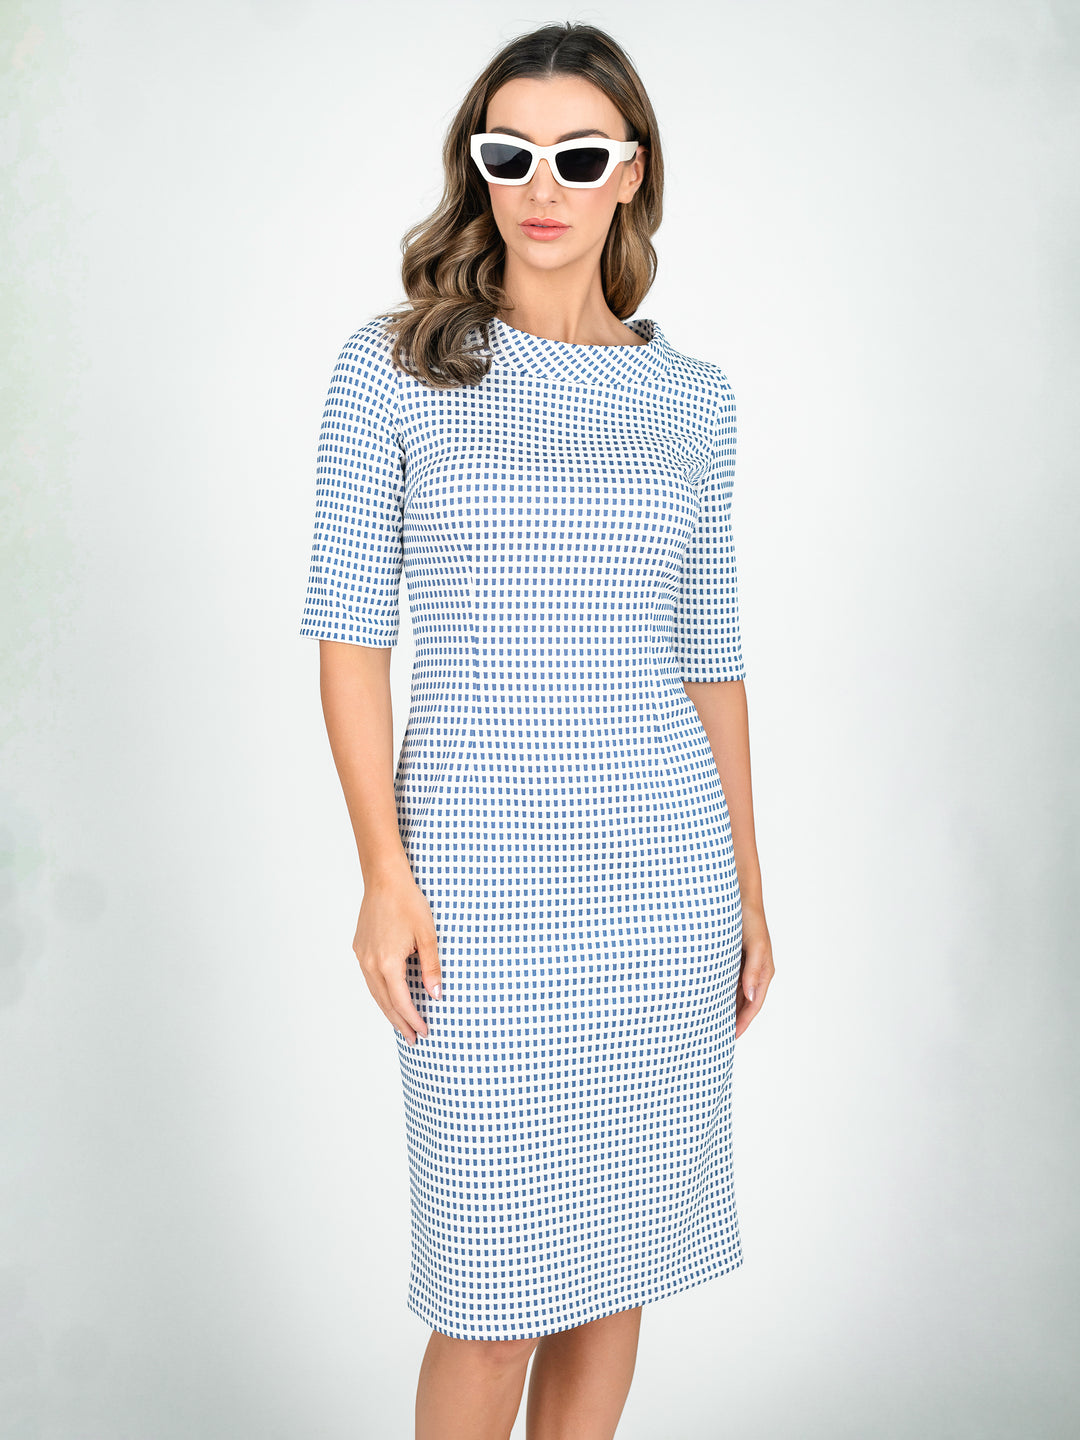 Blue and ivory women's 3/4 sleeve knee length tailored dress with boat neck standing collar and white sunglasses